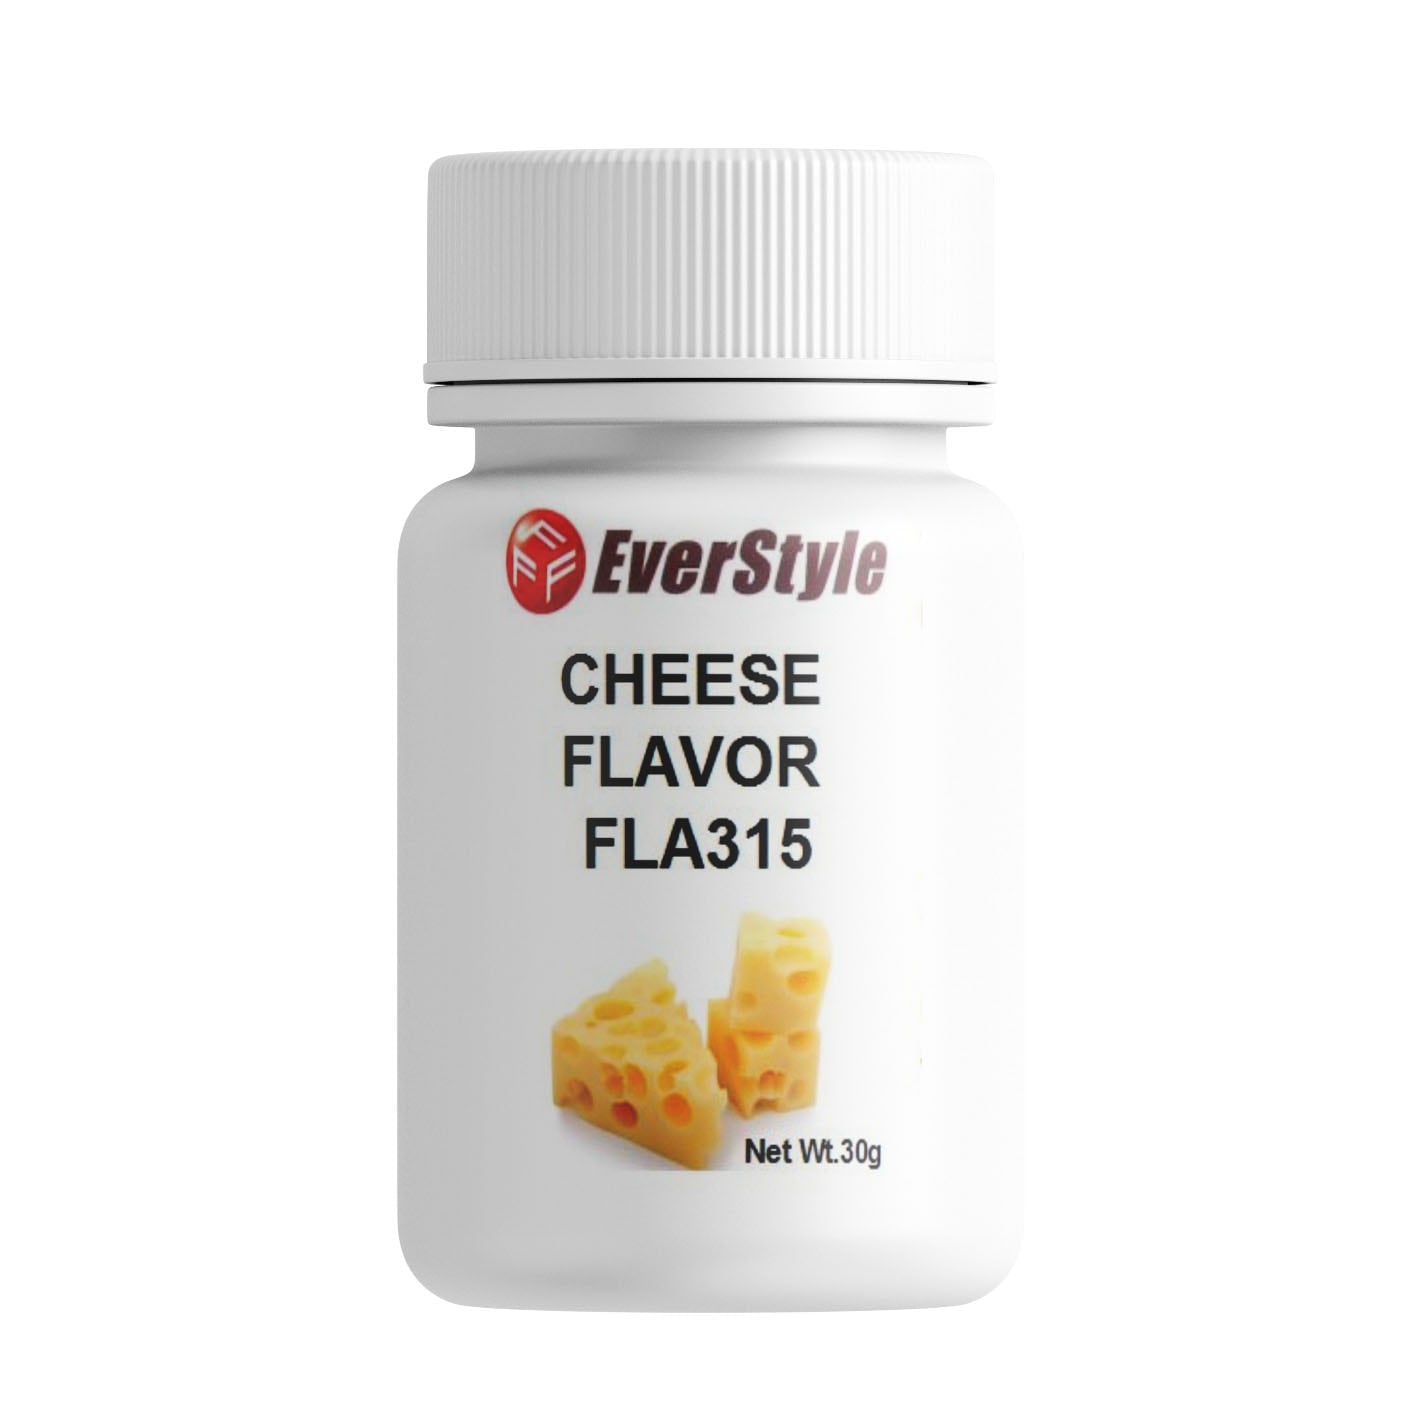 Everstyle Cheese Flavor 30g  (FLA315)